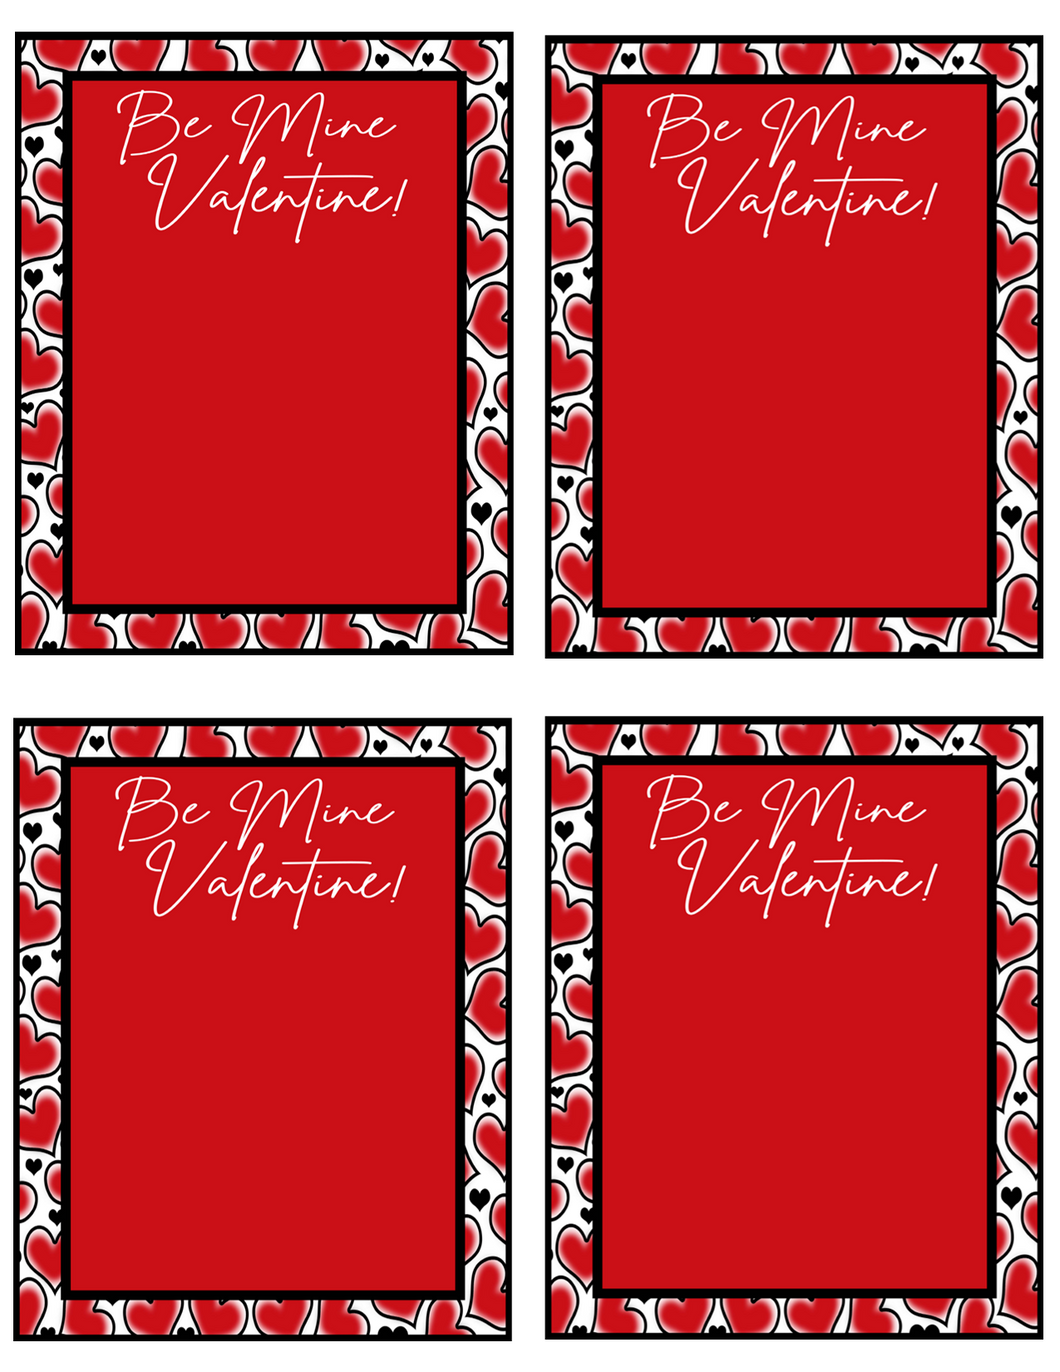 Be Mine Valentine Card 4x5 - Dots and Bows Designs